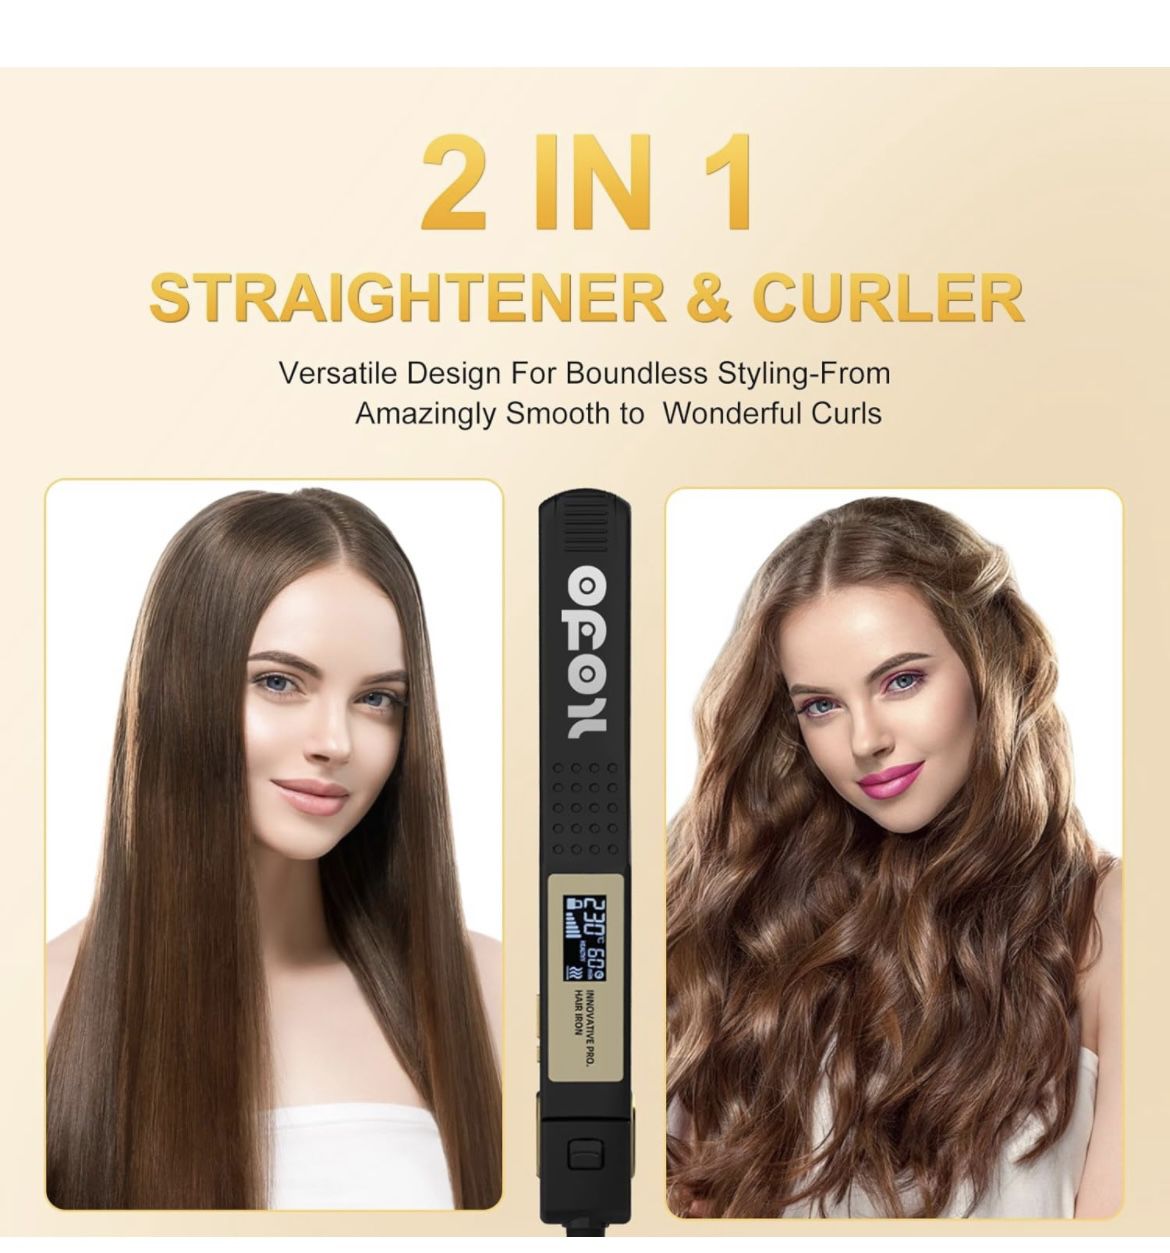 Titanium Flat Iron Hair Straightener and Curler, 2-in-1 Ion Hair Styler with Digital LCD Display, Dual Voltage Instant Heating for Professional Straig